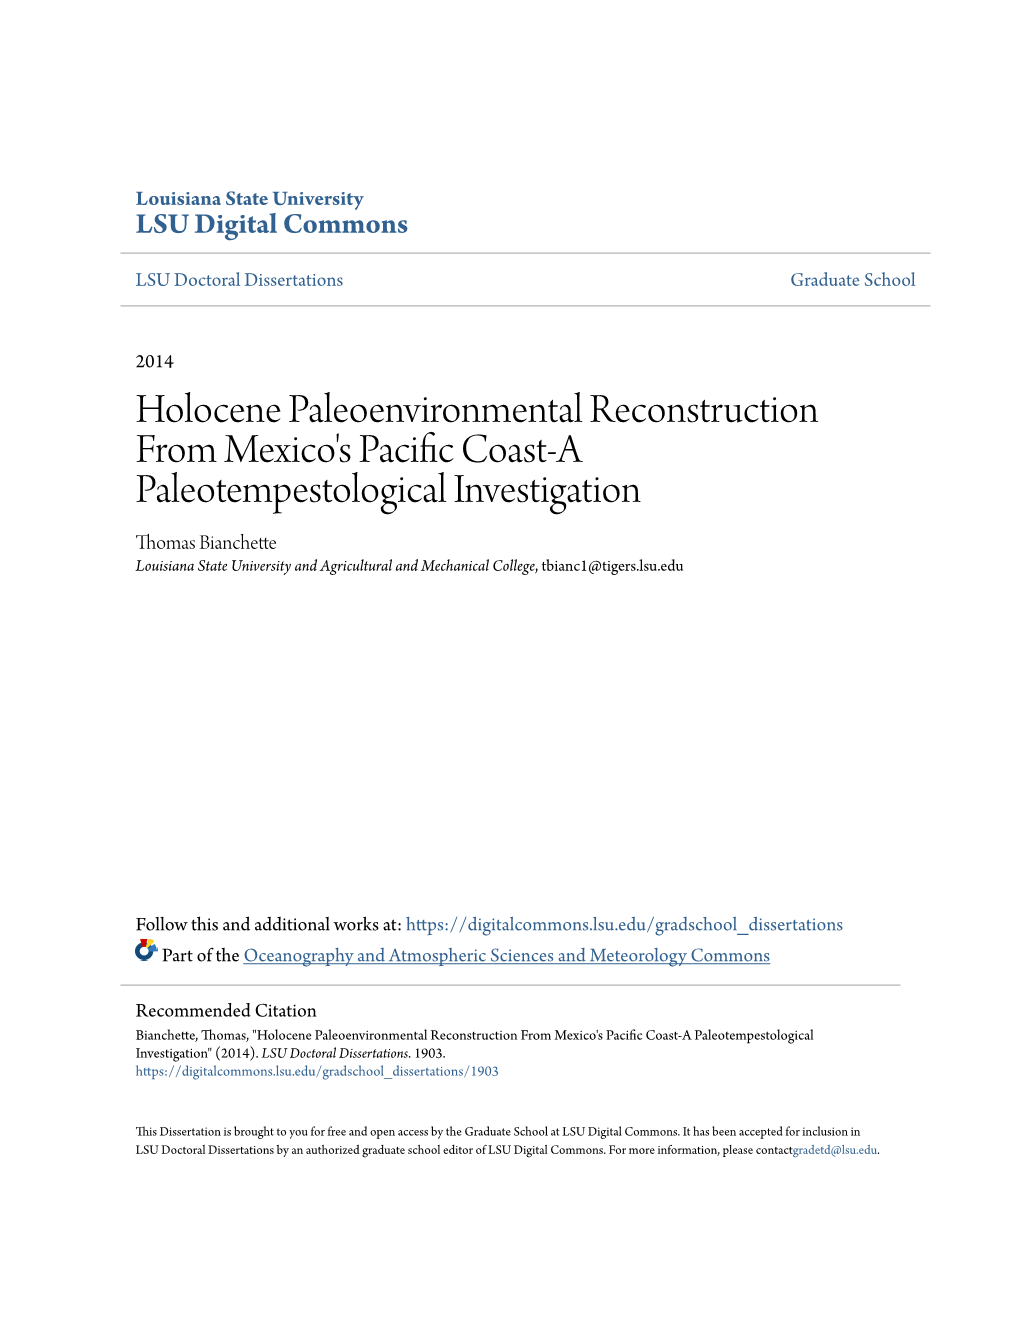 Holocene Paleoenvironmental Reconstruction from Mexico's Pacific Coast-A Paleotempestological Investigation